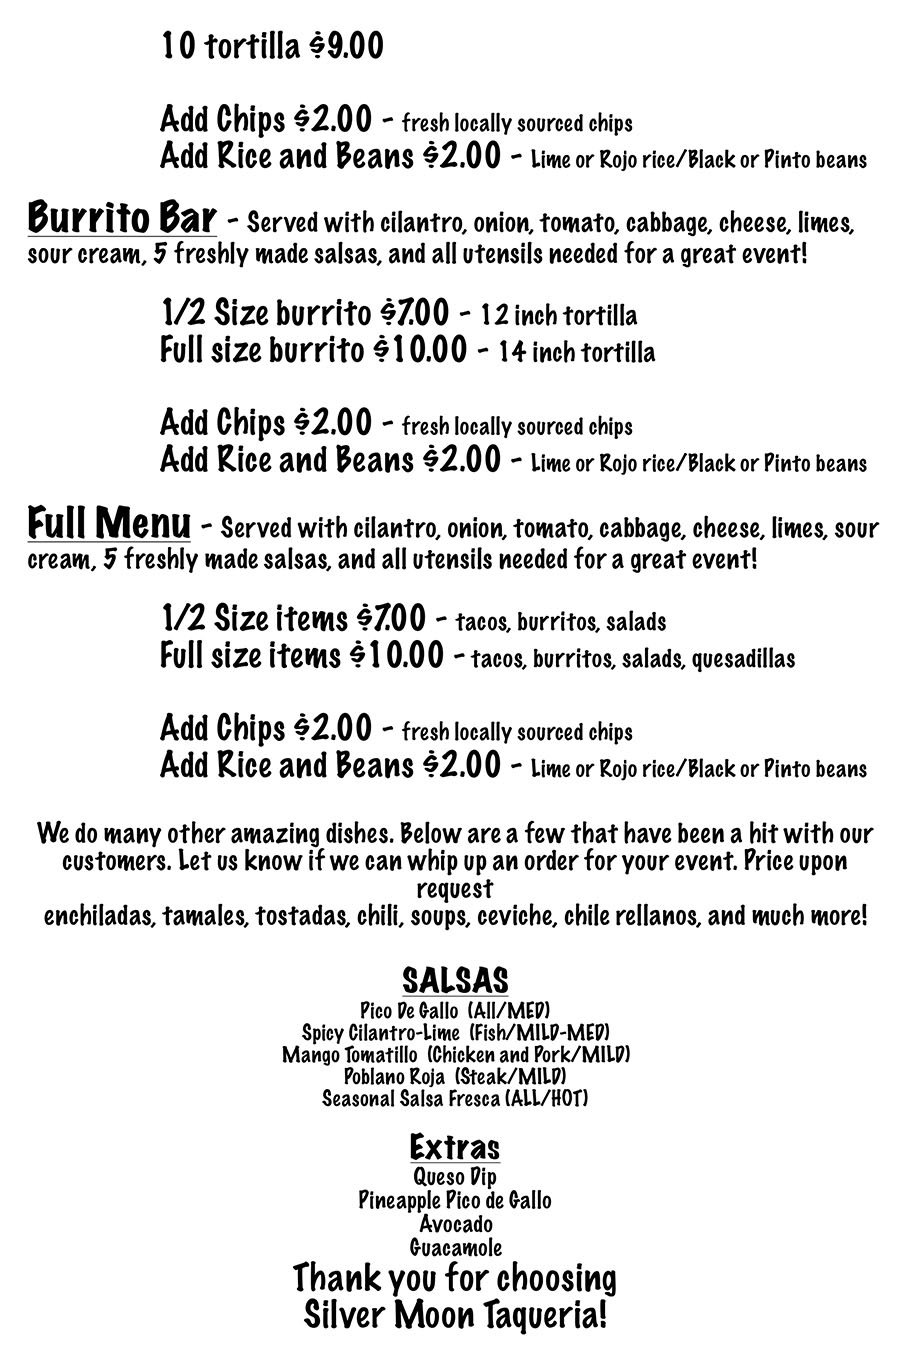 Silver Moon Taqueria catering menu page two